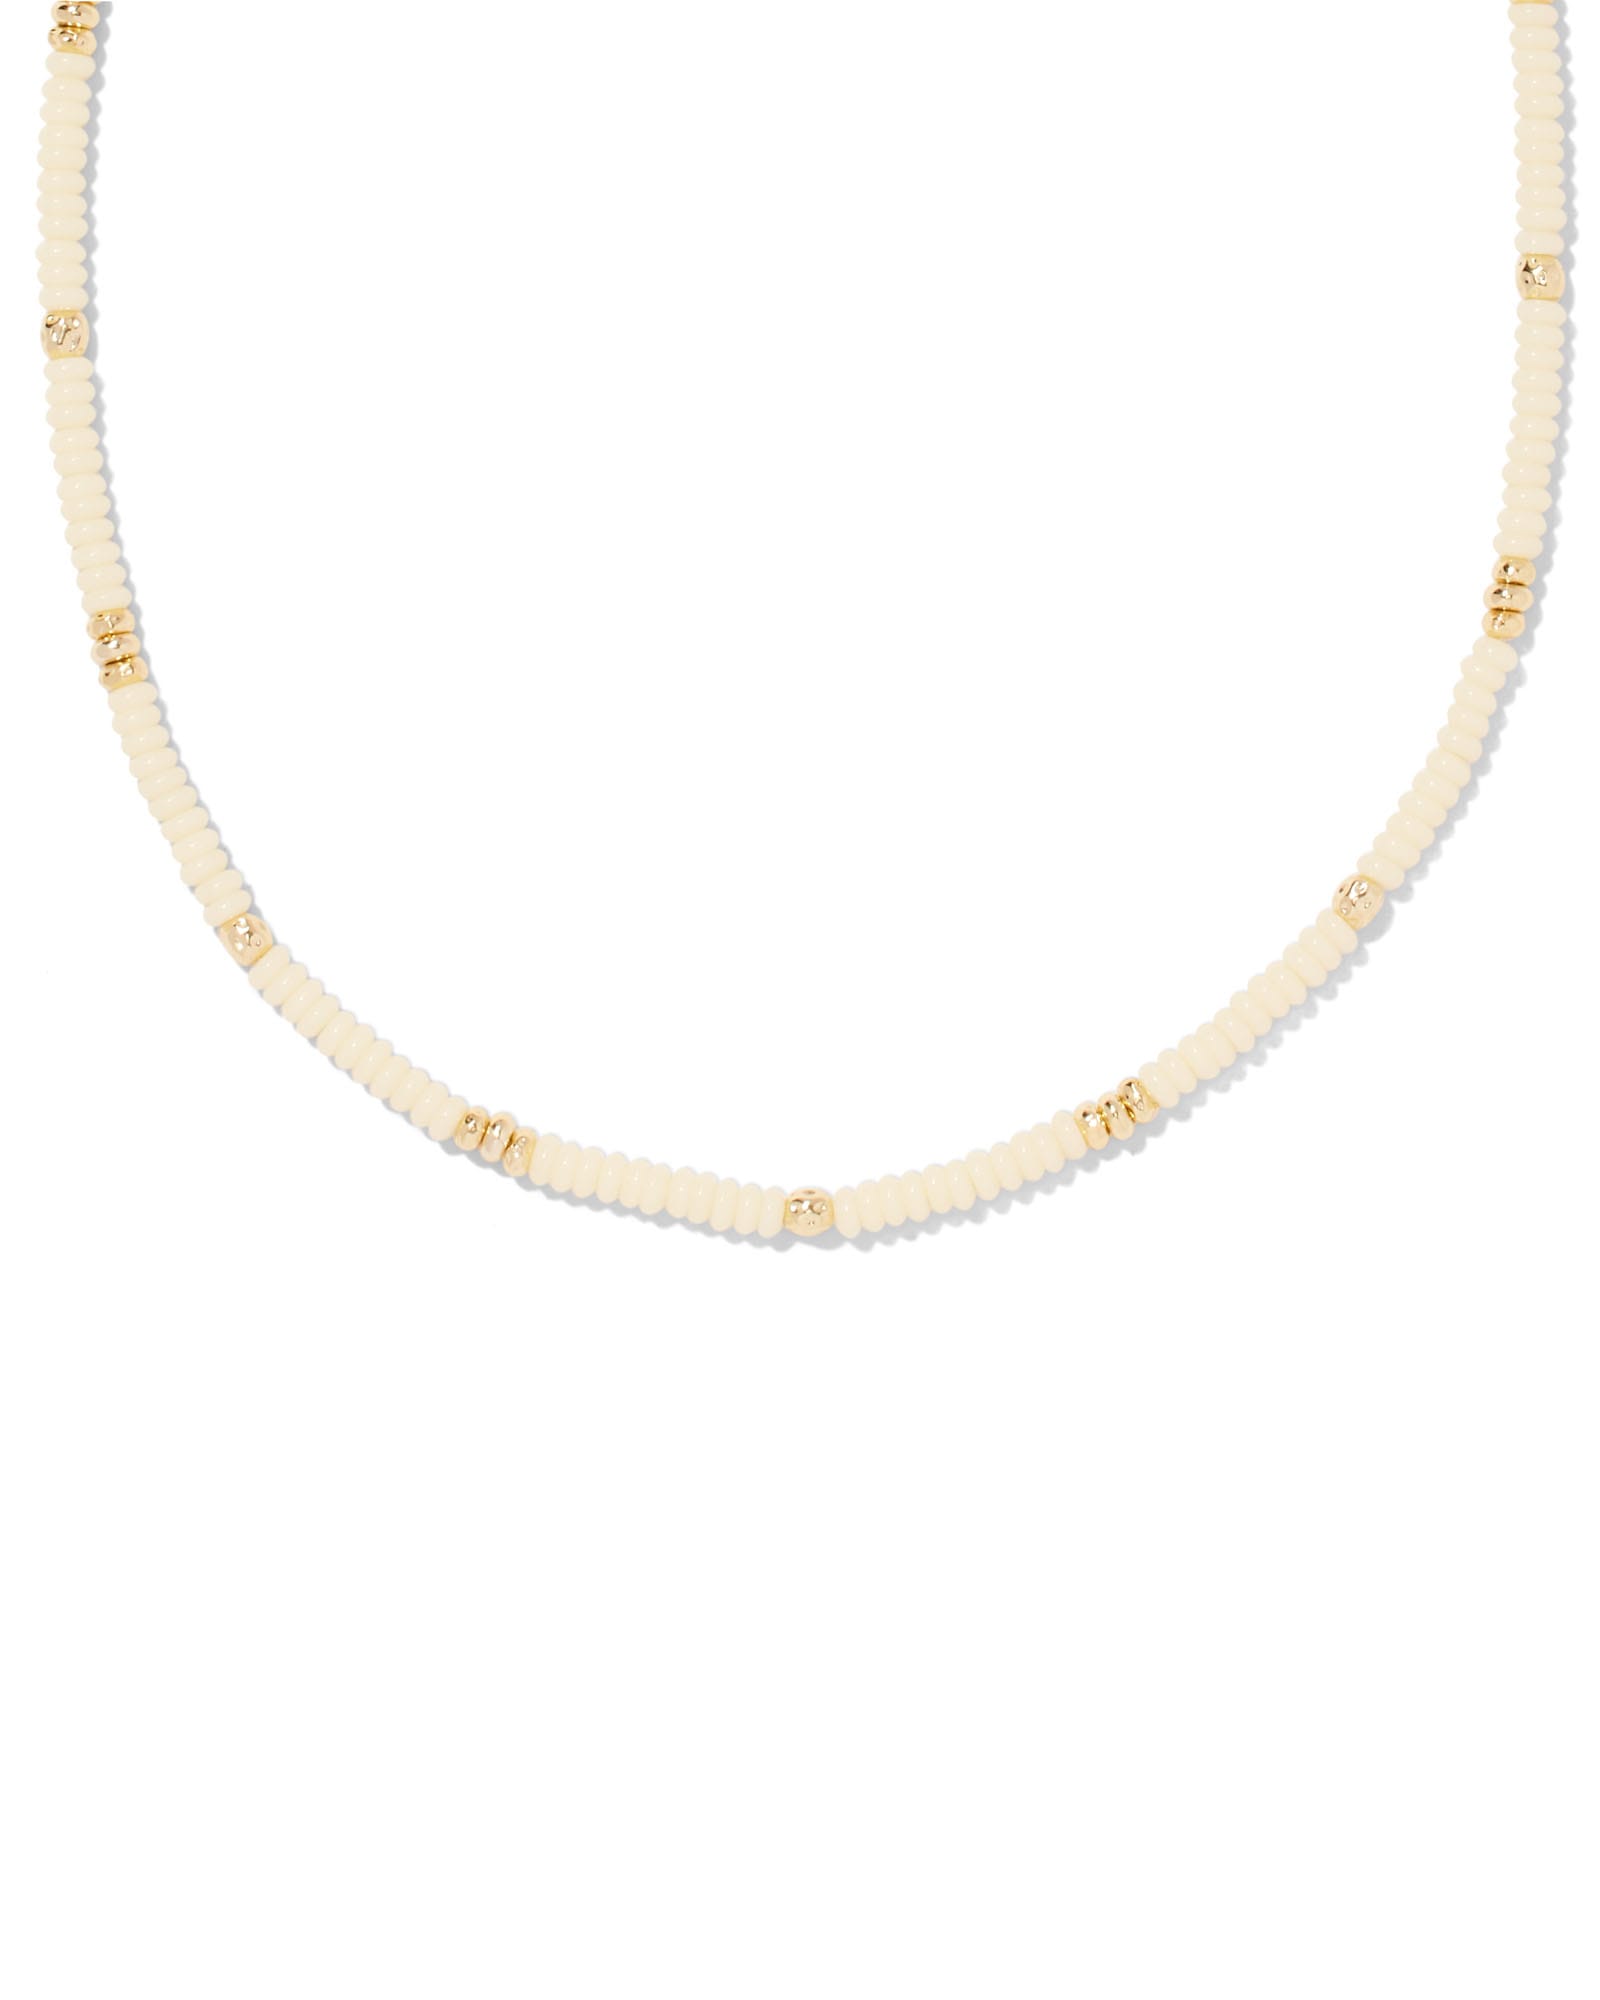 Deliah Gold Strand Necklace in Ivory Mother-of-Pearl